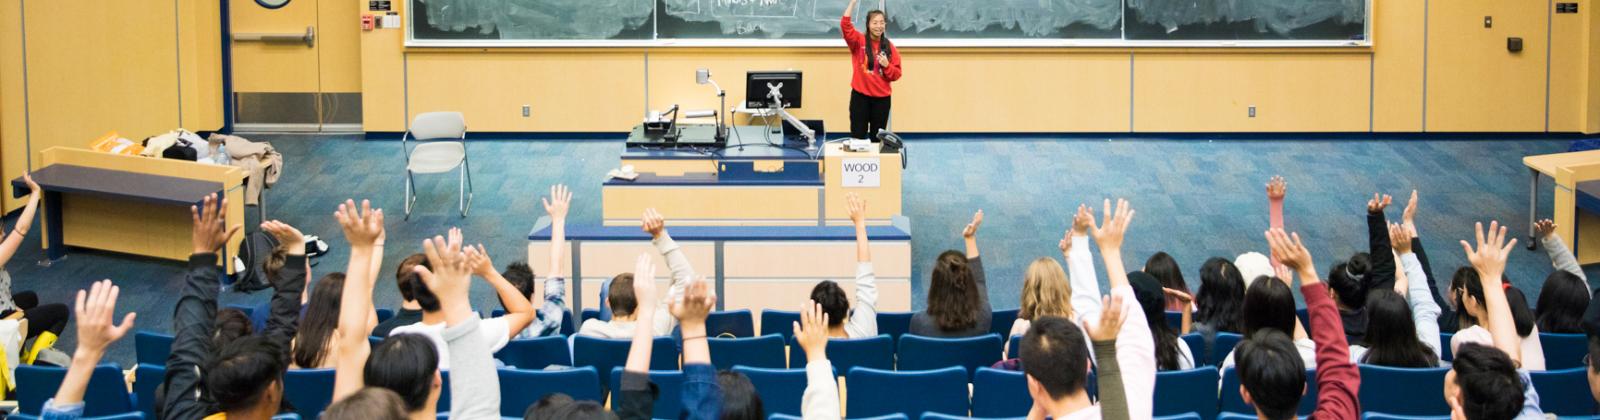 Students raising their hands in a lecture hall